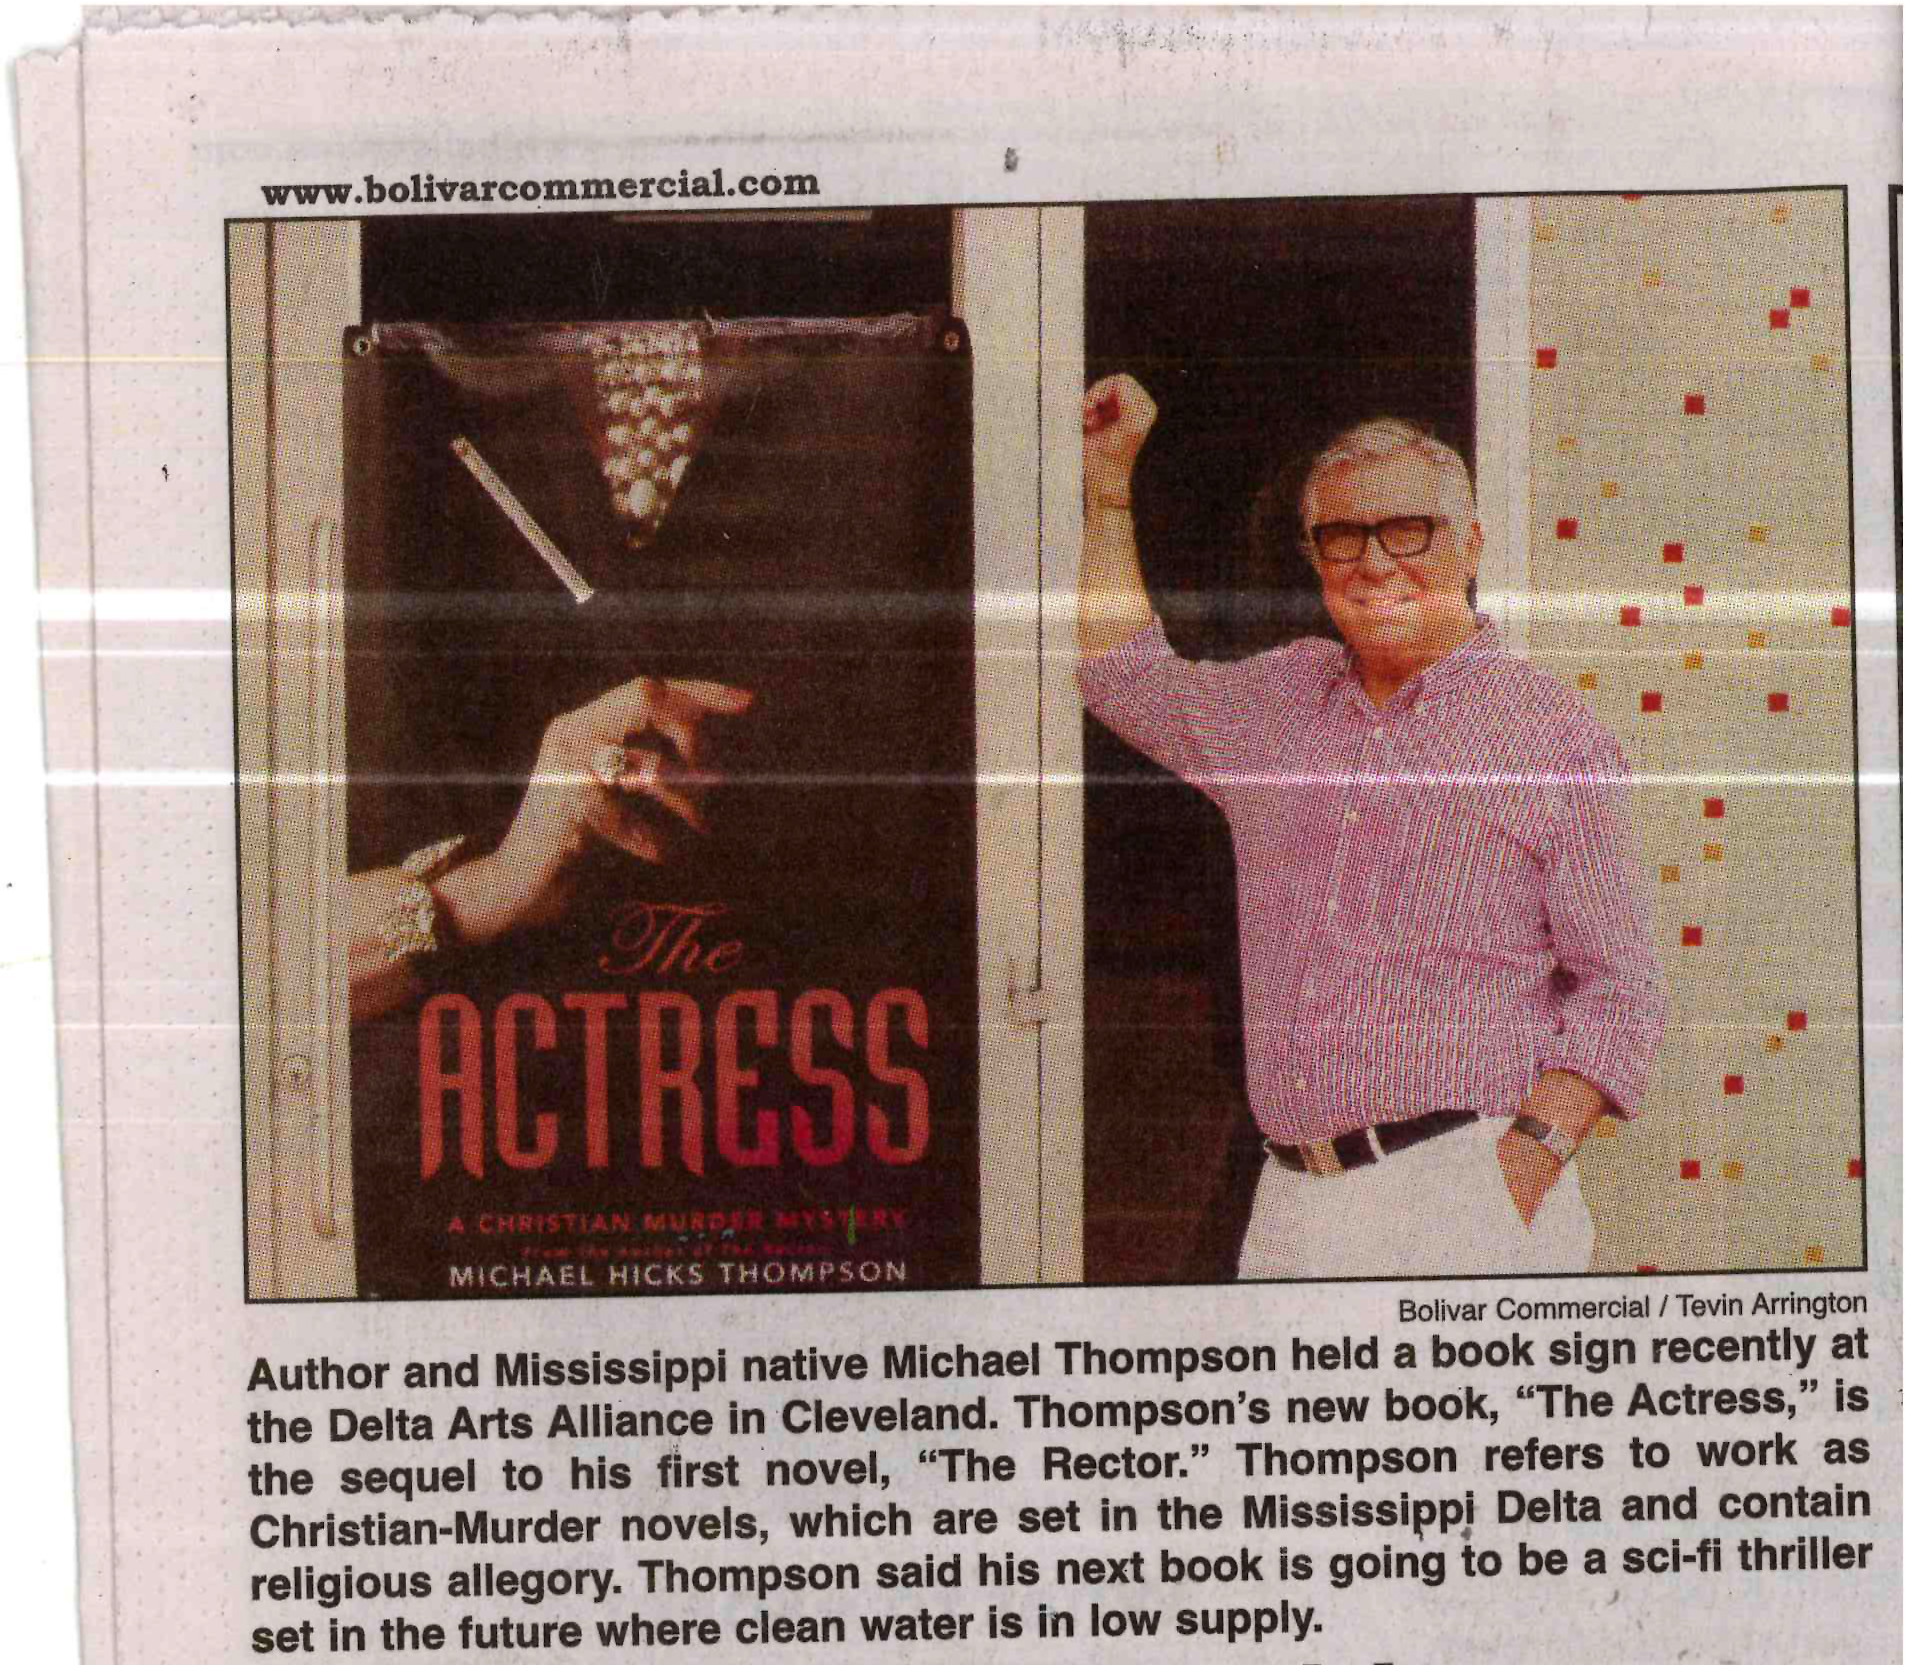 Bolivar Commercial Highlights Michael Thompson and his Novel The Actress